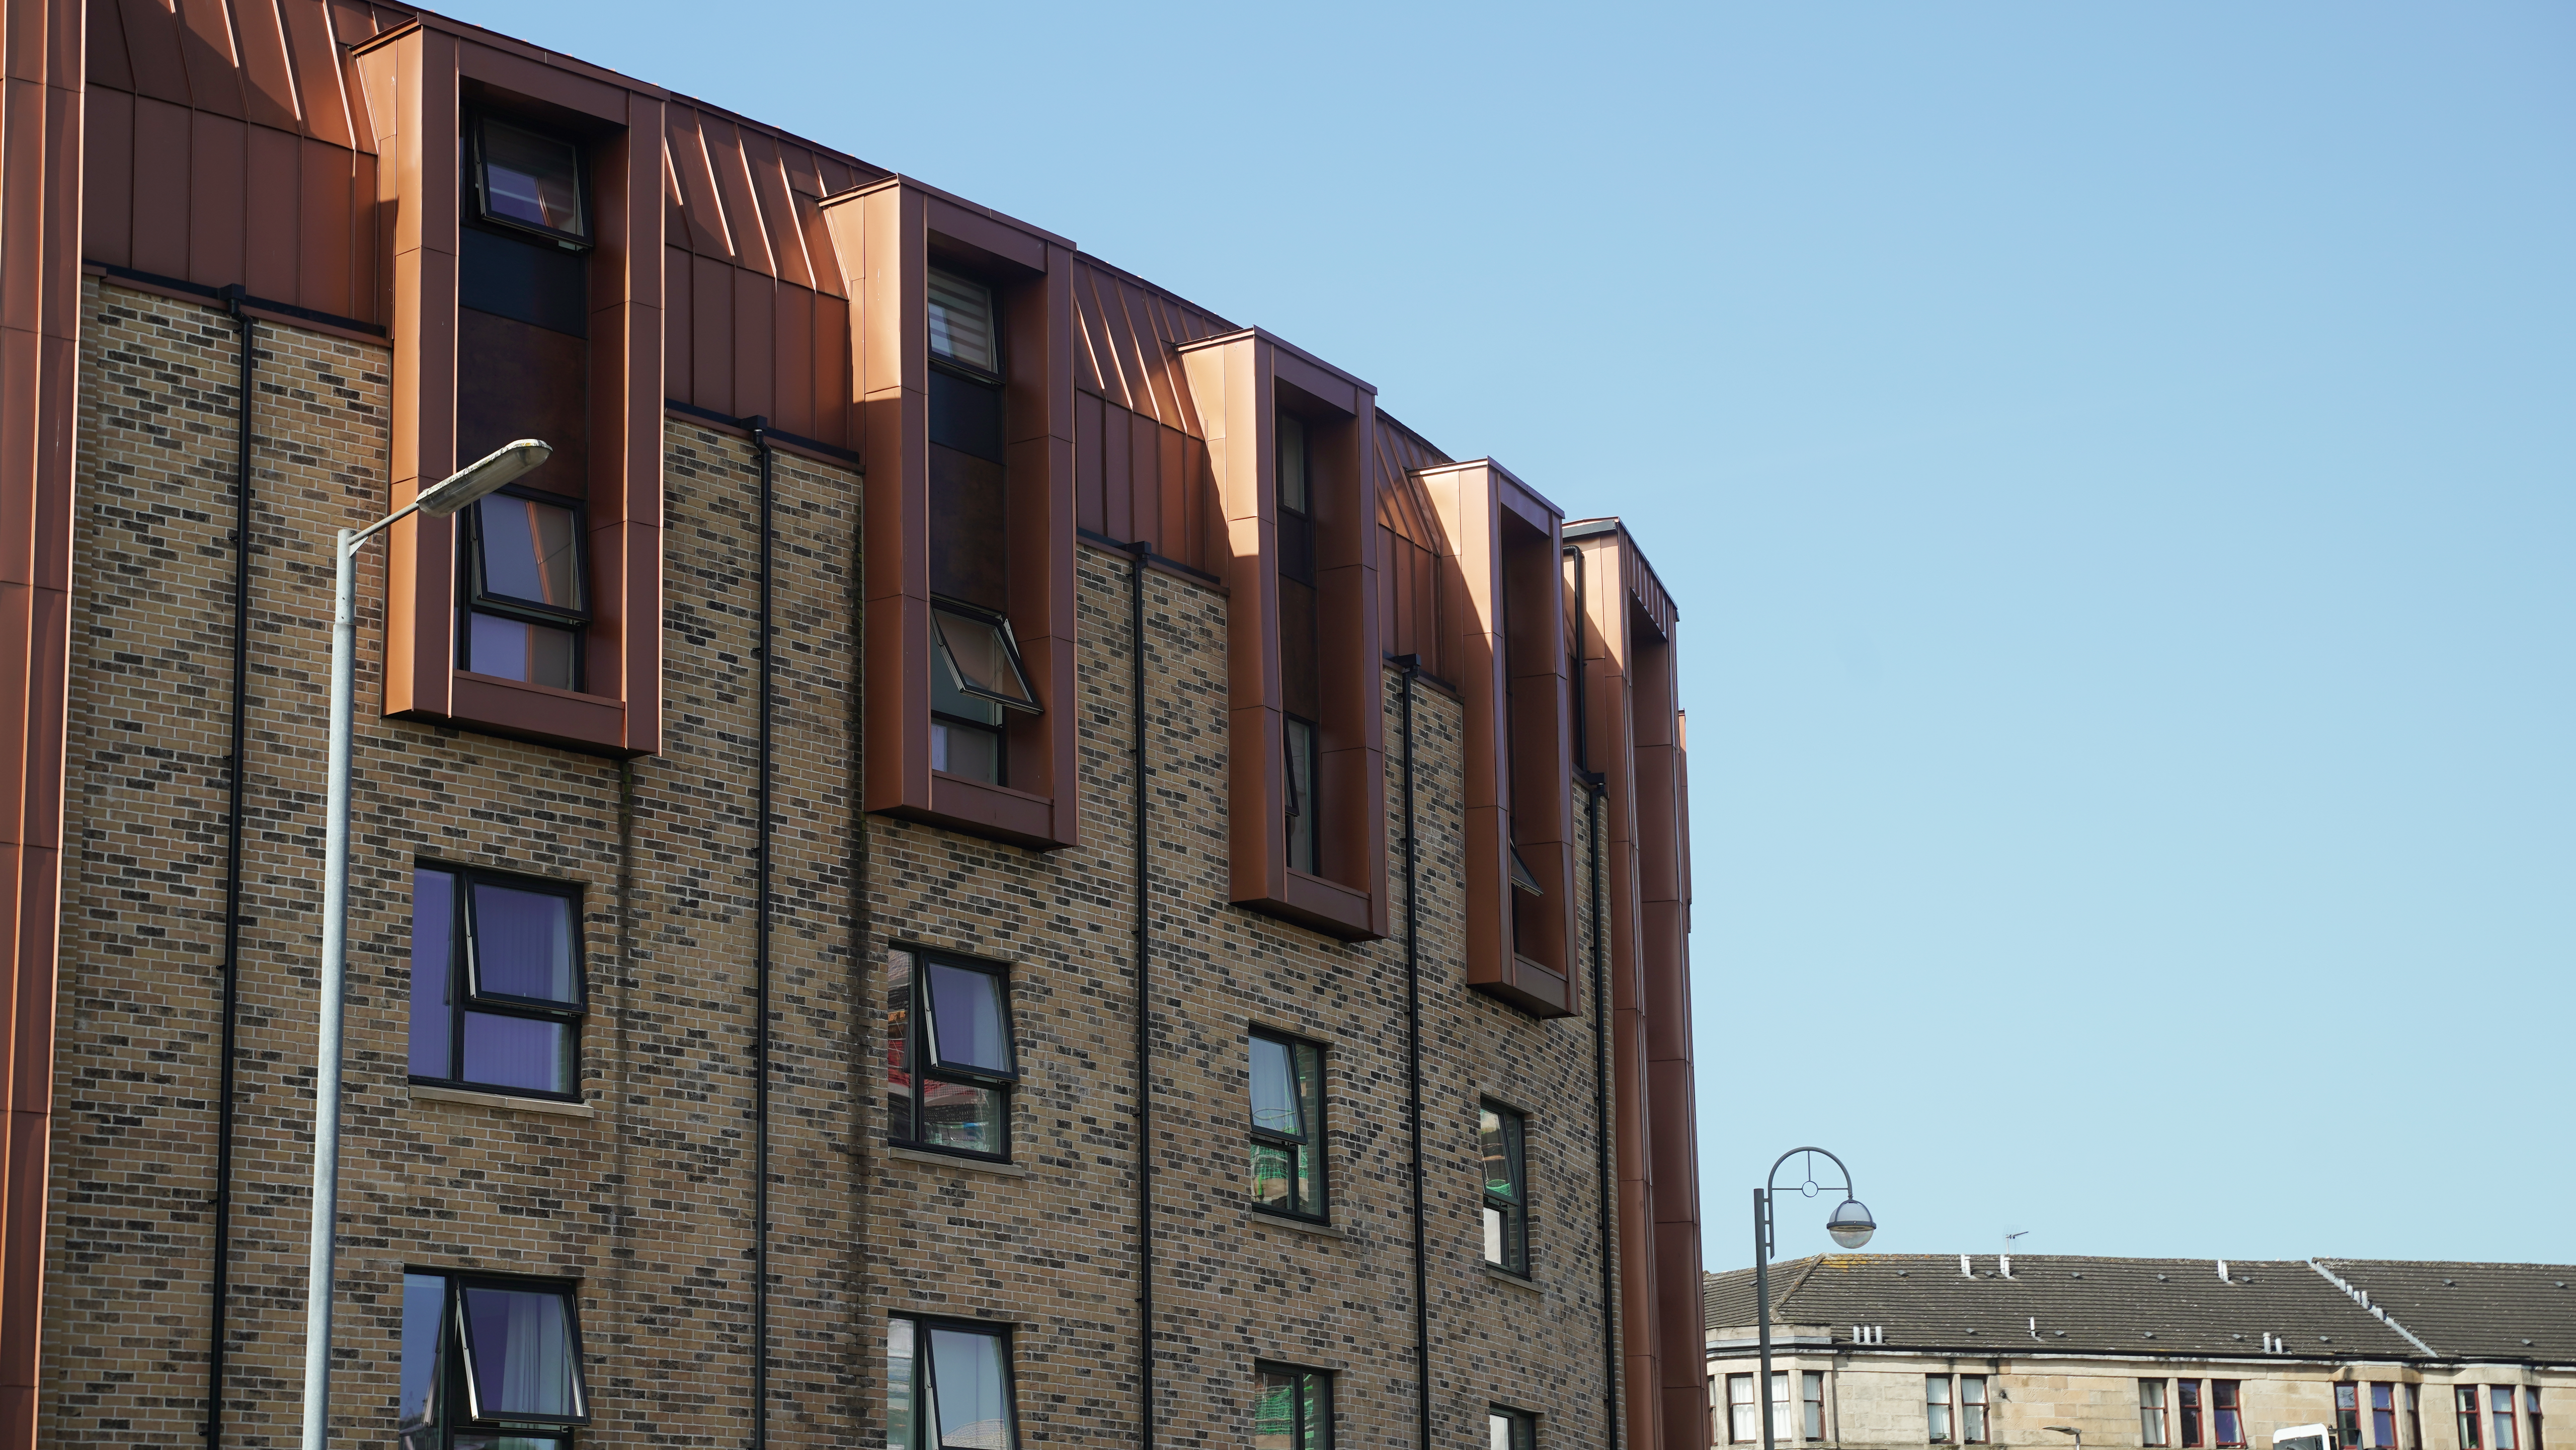 The façade of a residential development on Nethan Street in Glasgow, accentuated by the tasteful use of FALZONAL in New Copper. The PREFA aluminium product gives the building envelope a vibrant and inviting appearance through its reflection of sunlight. The combination of the traditional brick structure with the modern, copper-coloured accents of the FALZONAL conveys an elegant symbiosis of old and new and highlights the architecture in this urban context.